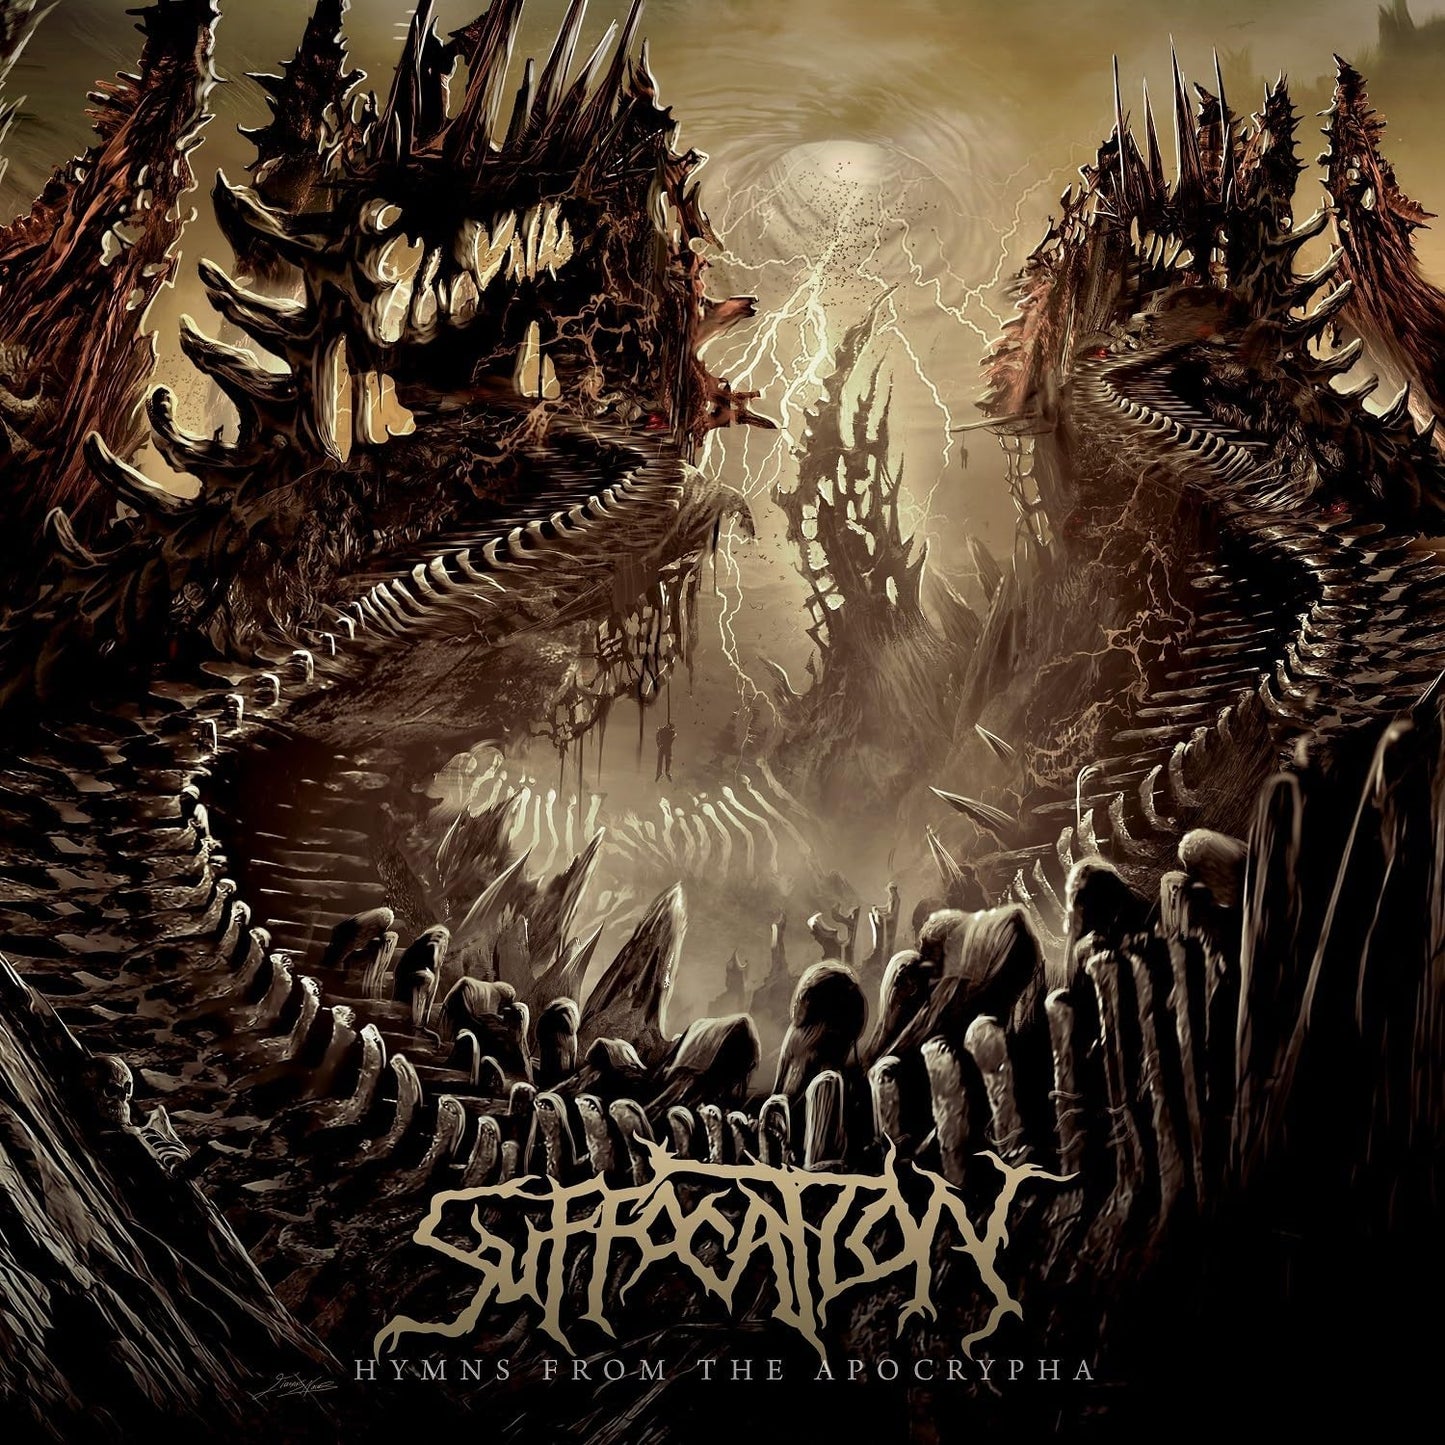 LP - Suffocation - Hymns From the Apocrypha